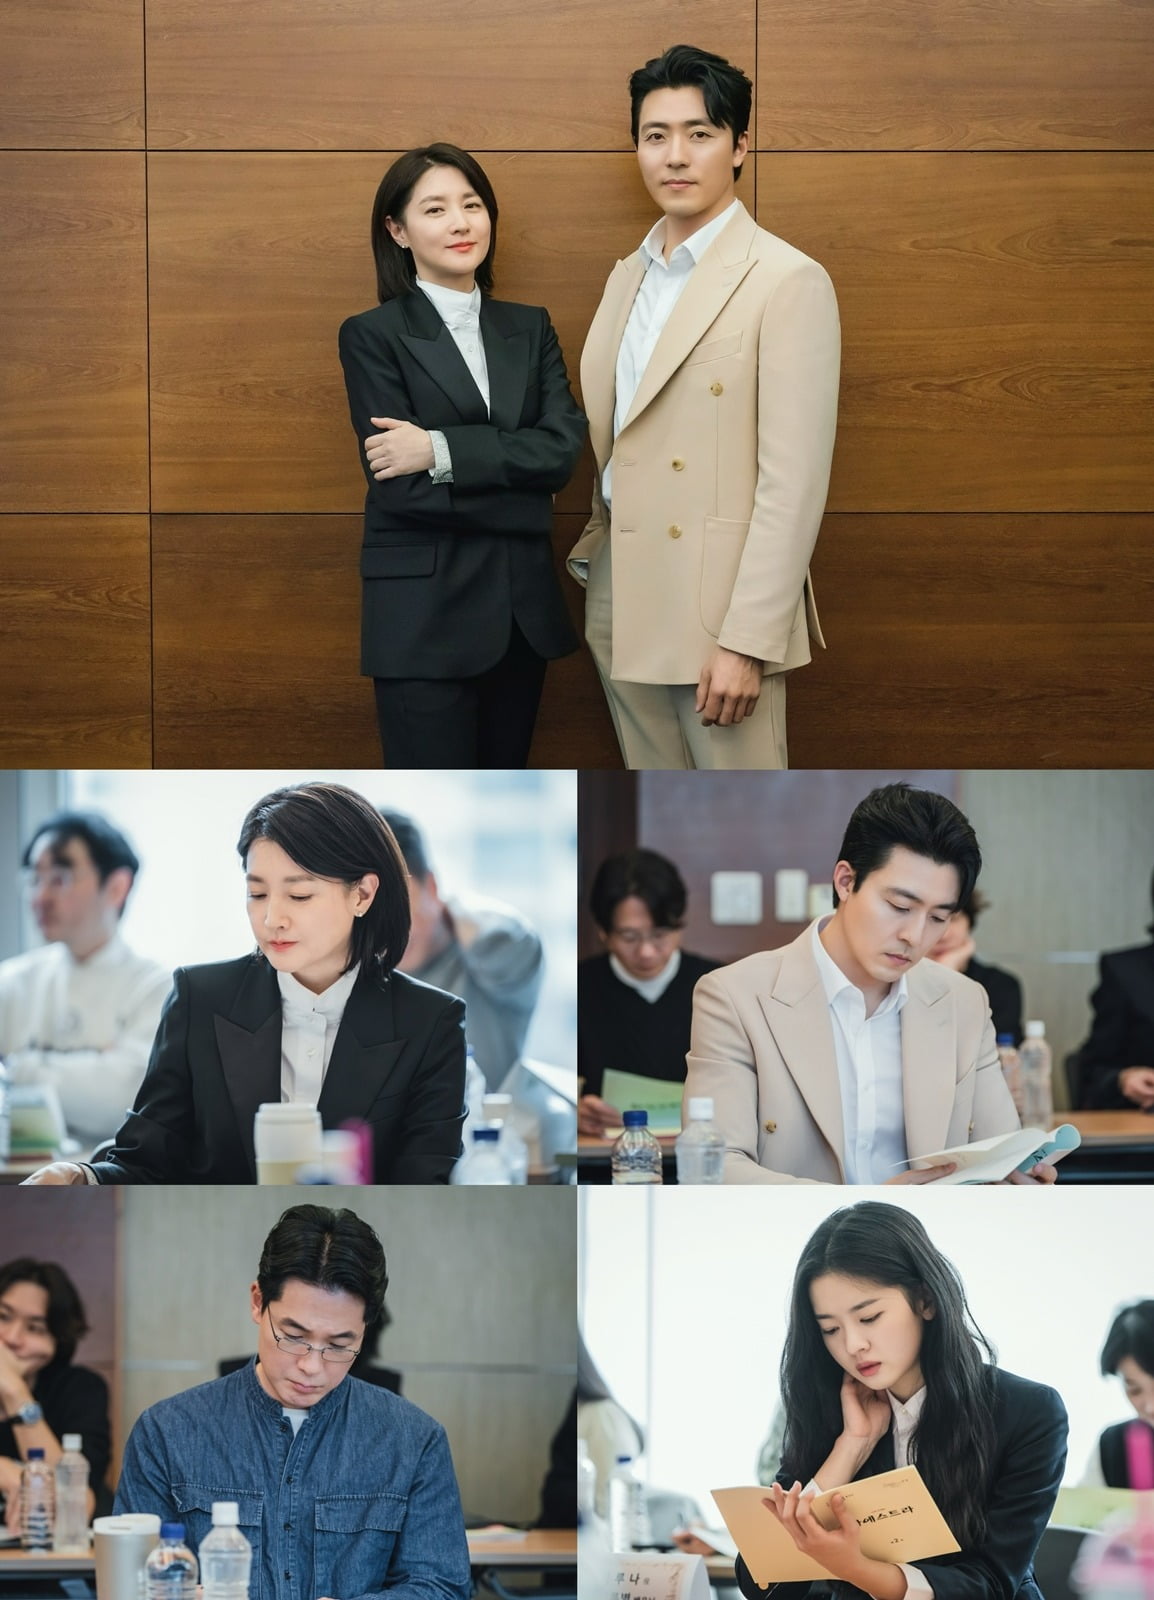 Lee Young-ae, unrivaled charisma ‘overwhelms the scene’